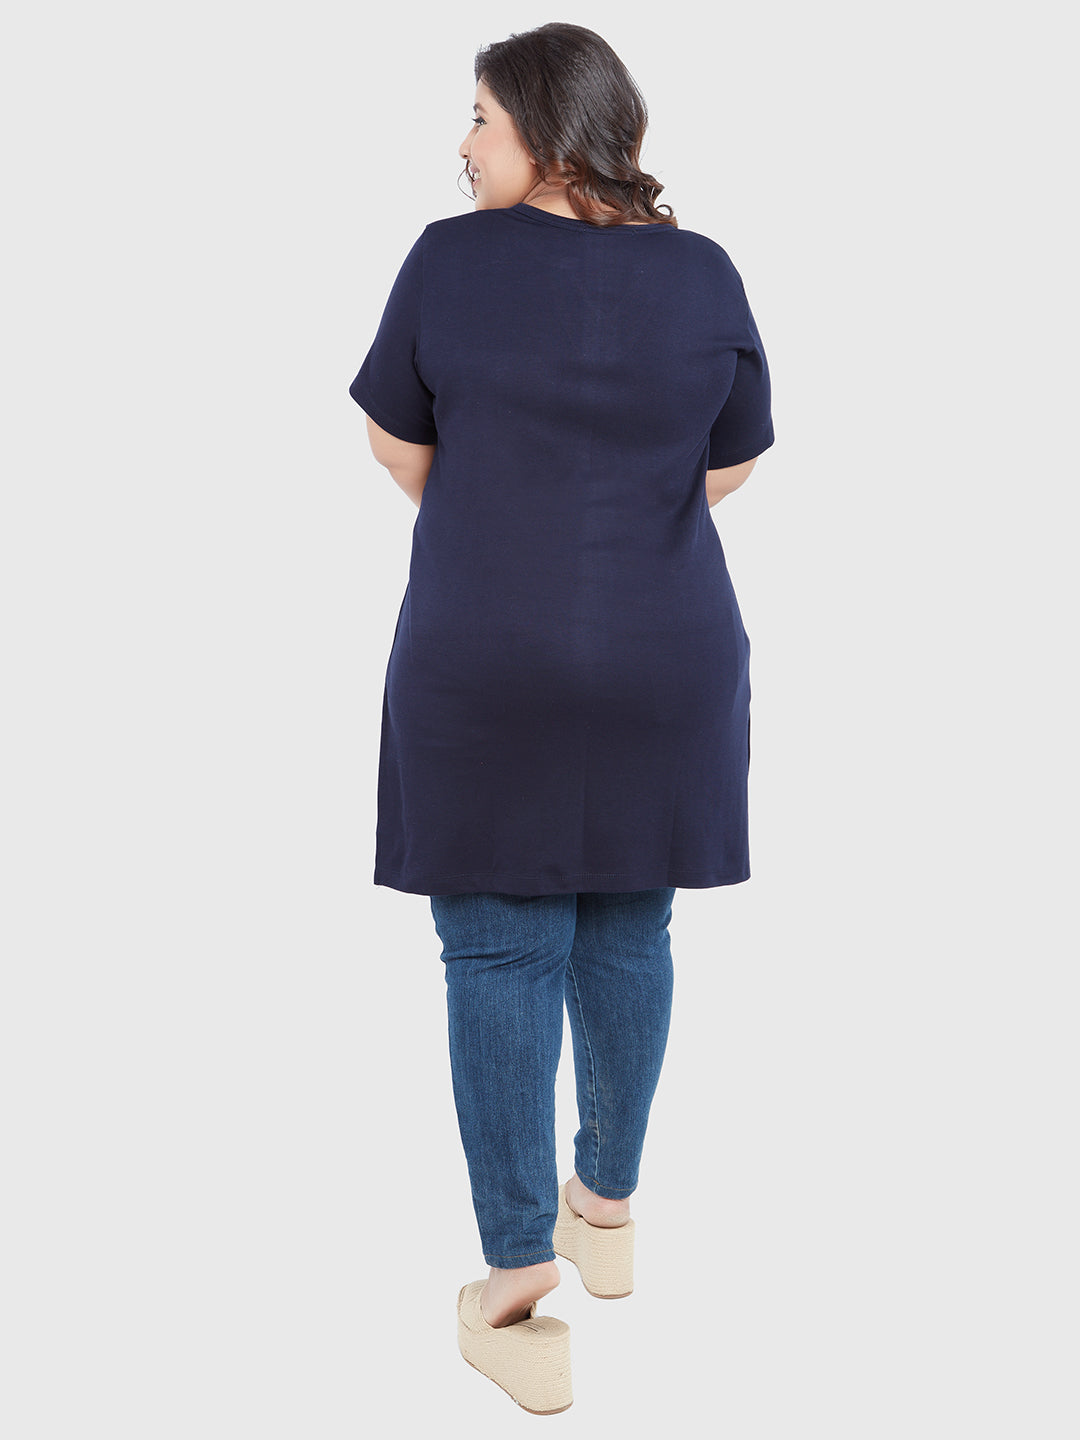 Plus Size Half Sleeves Long Top For Women - Navy Blue